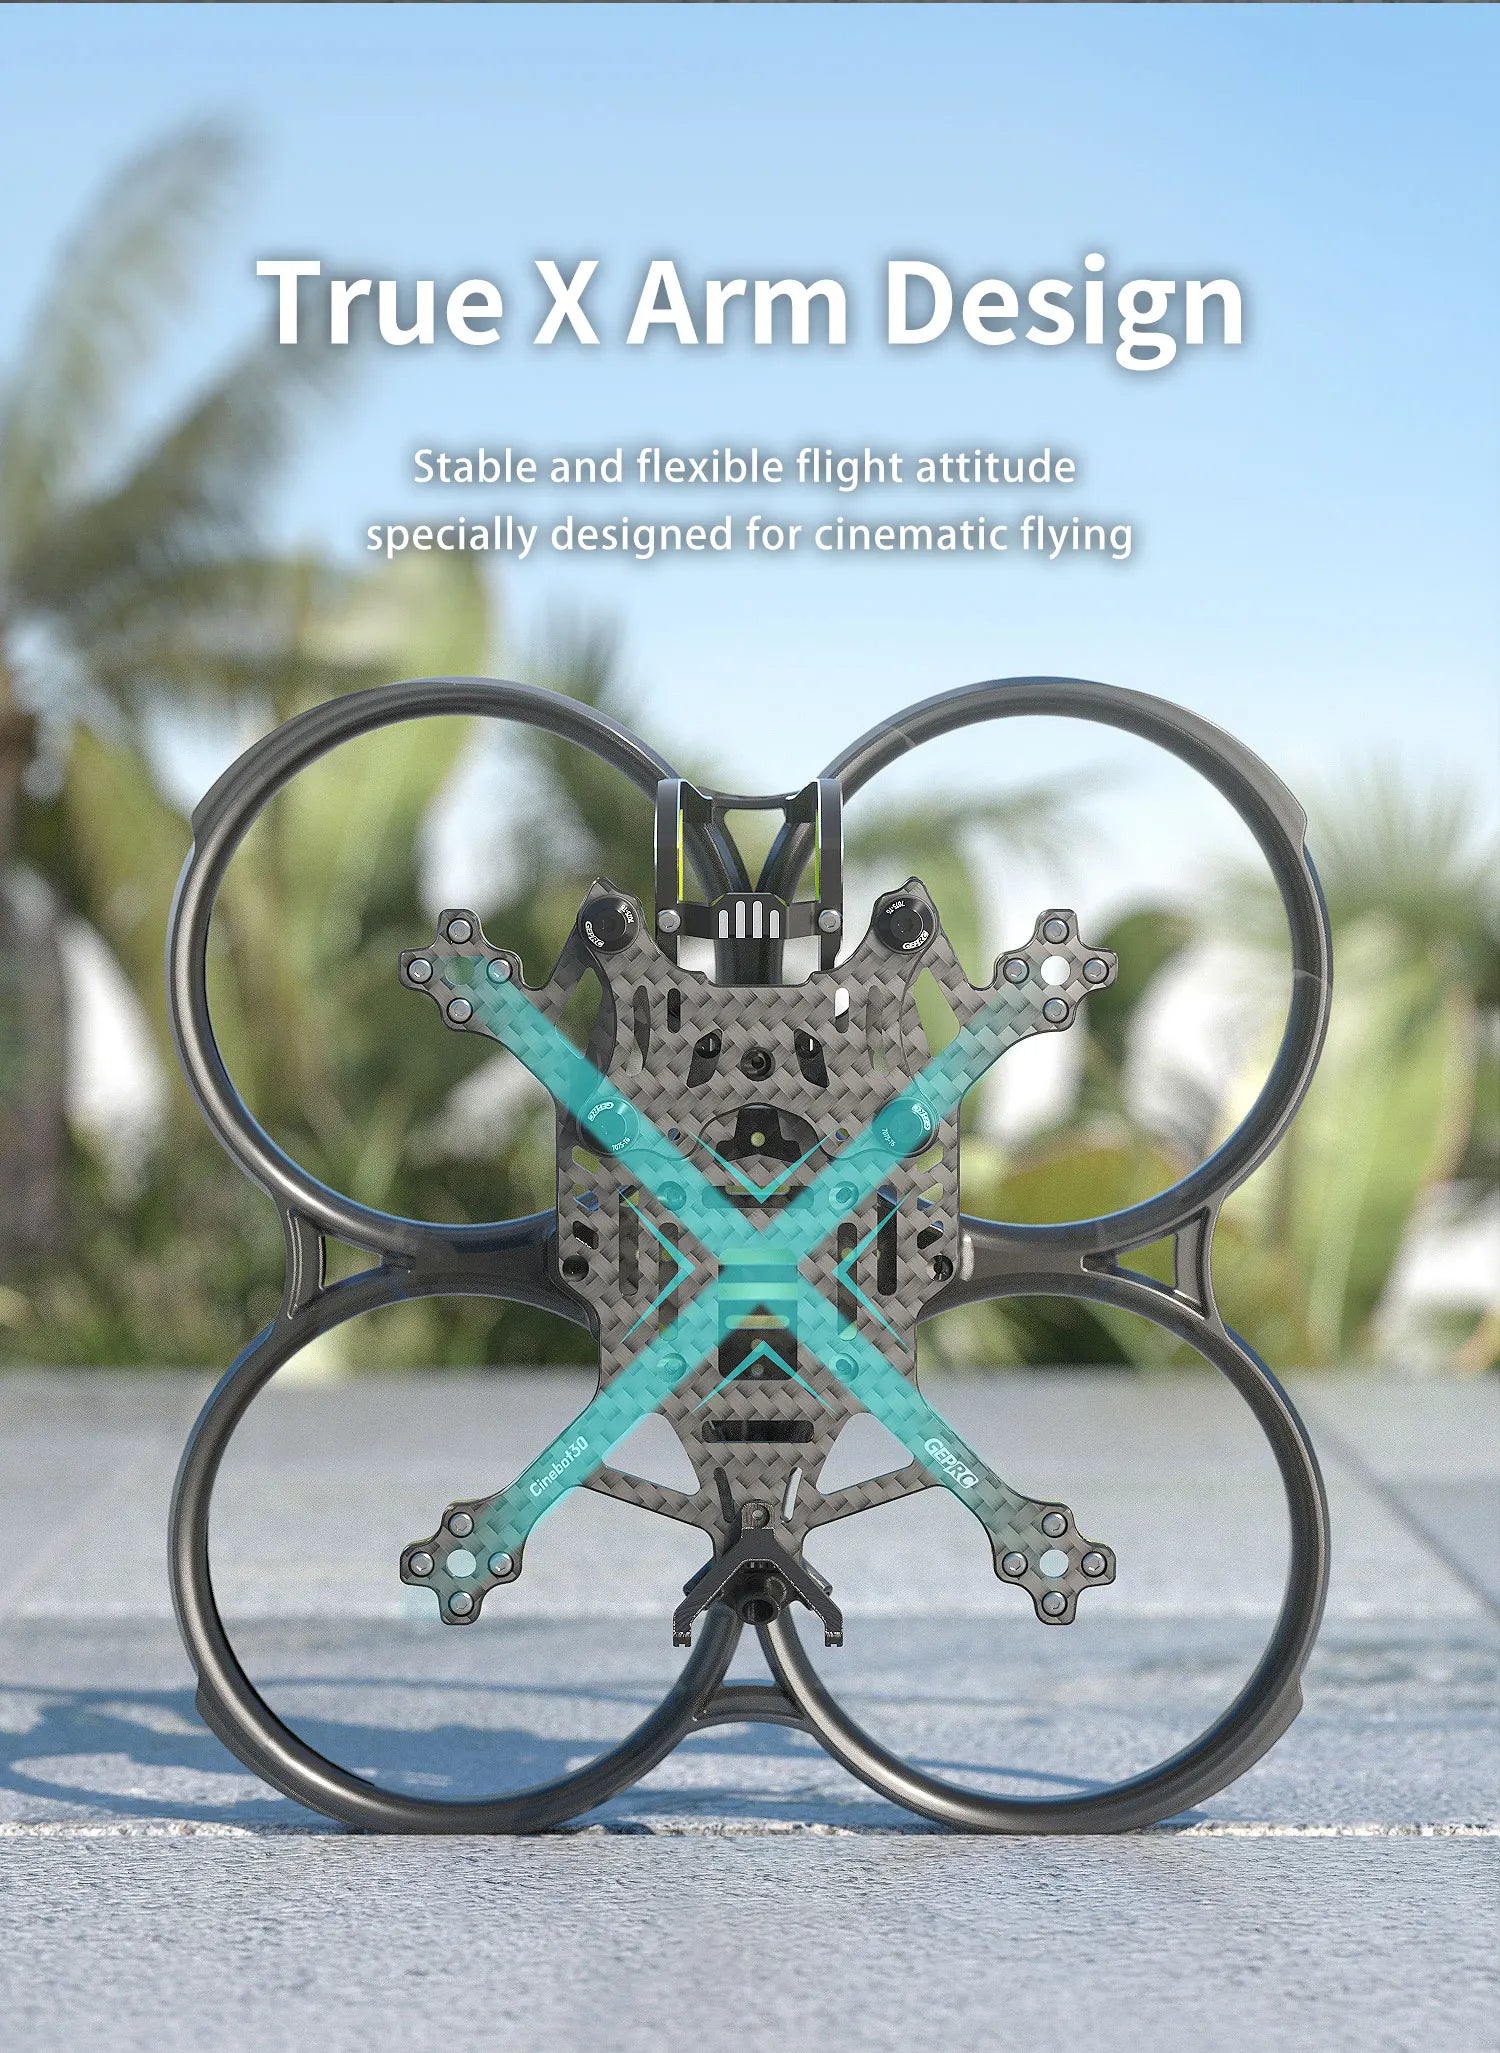 True X Arm Design Stable and flexible flight attitude specially designed for cinematic flying 0